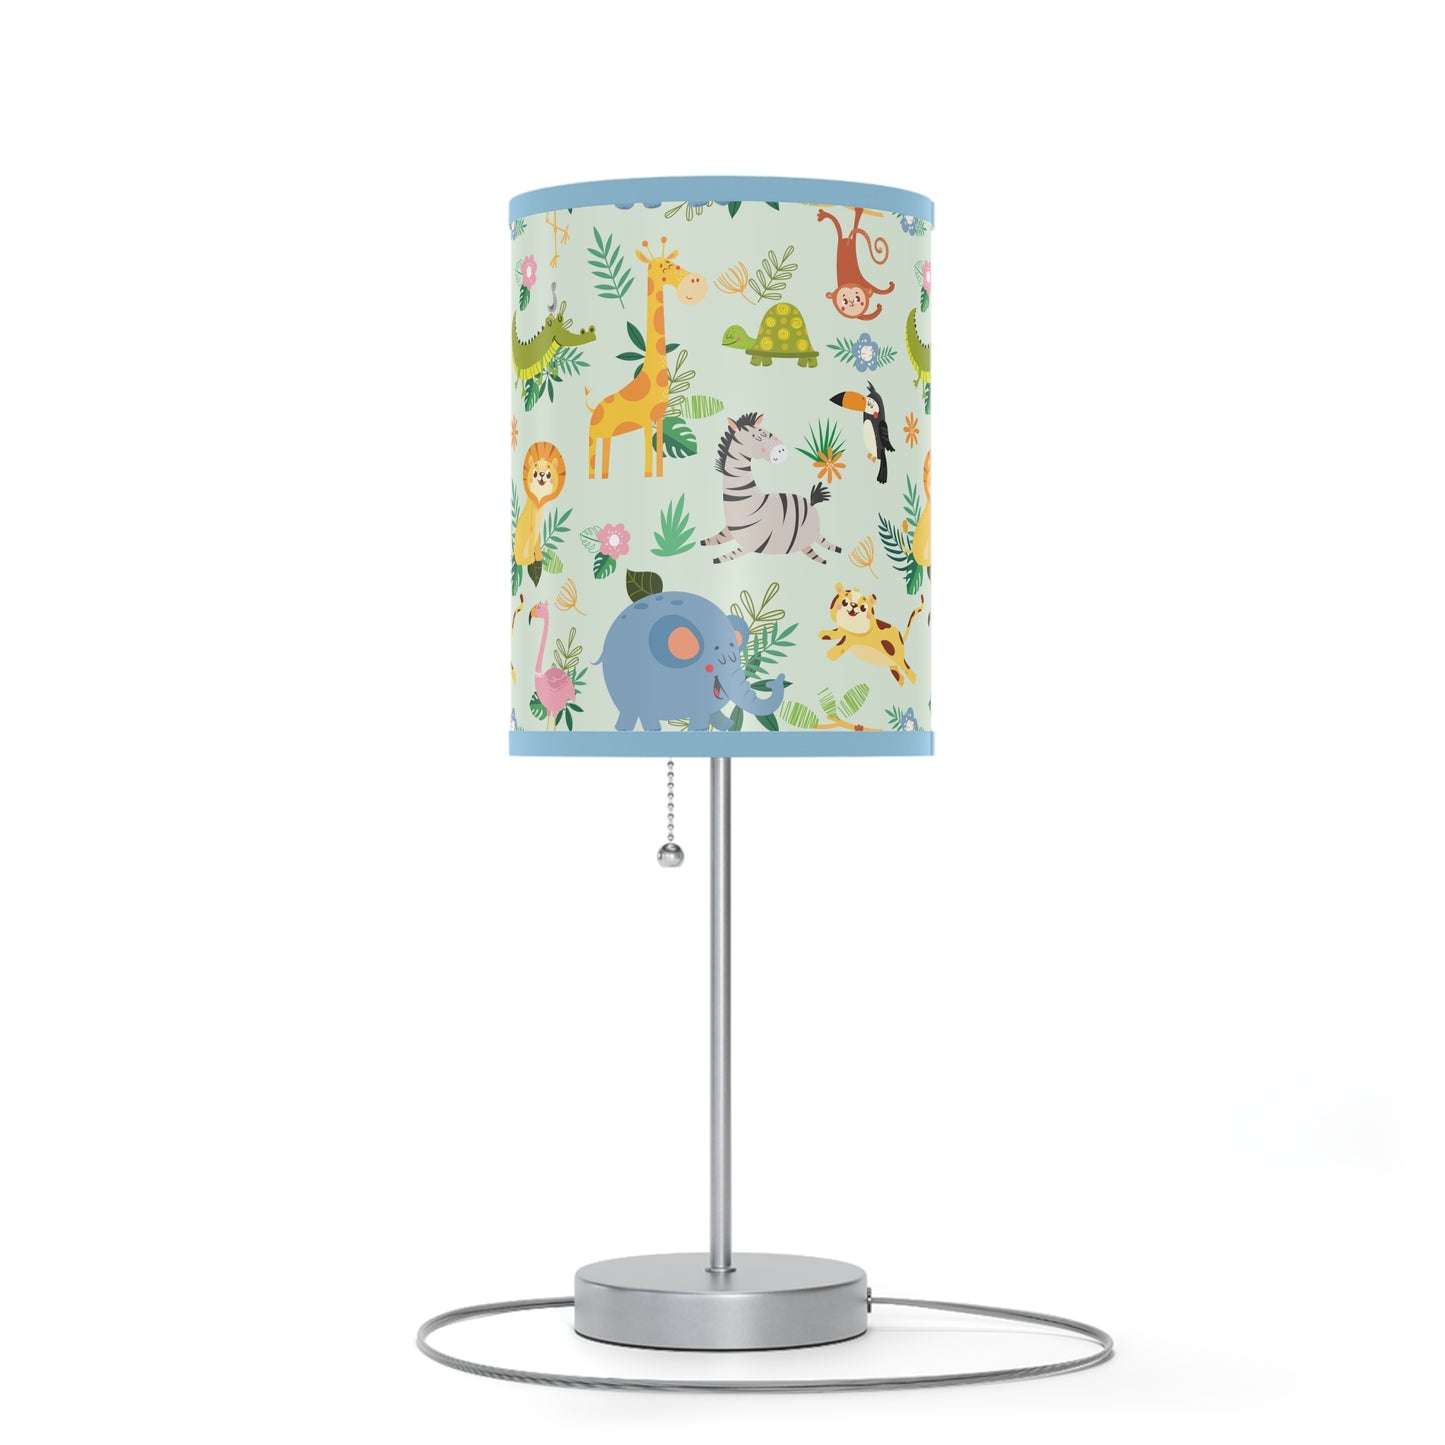 Lamp - Kid's Animal Lamp, Lamp on a Stand, US|CA plug, Choose Your Trim Color